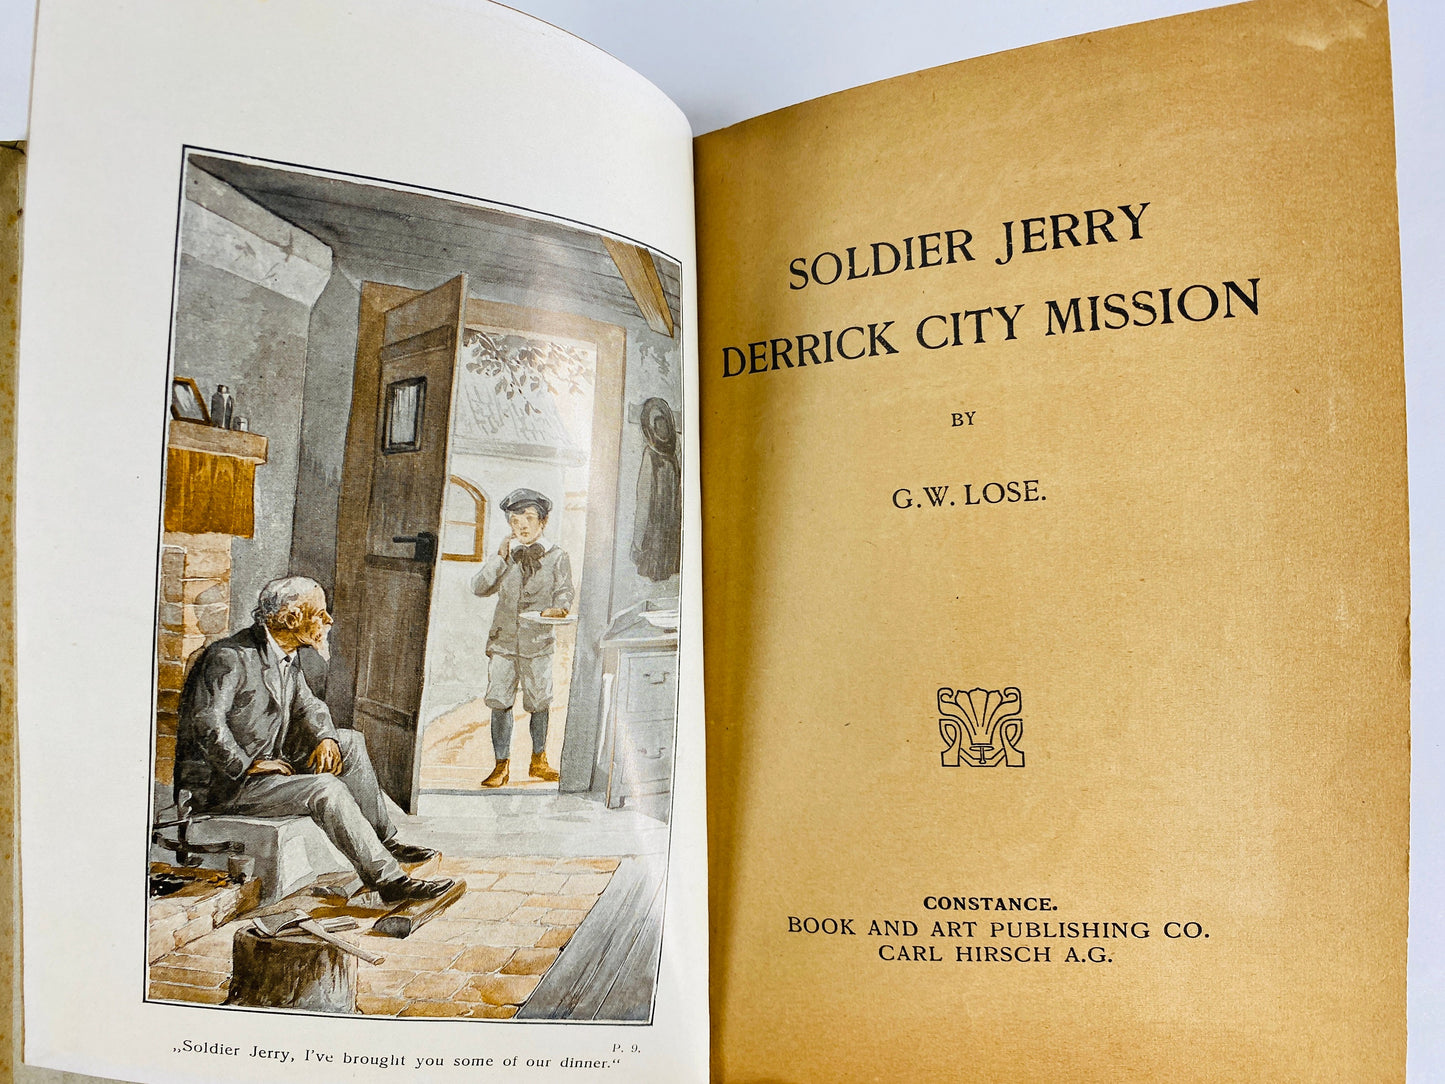 1922 Antique Sunday School book Soldier Jerry by GW Lose Vintage book published in Germany Christian